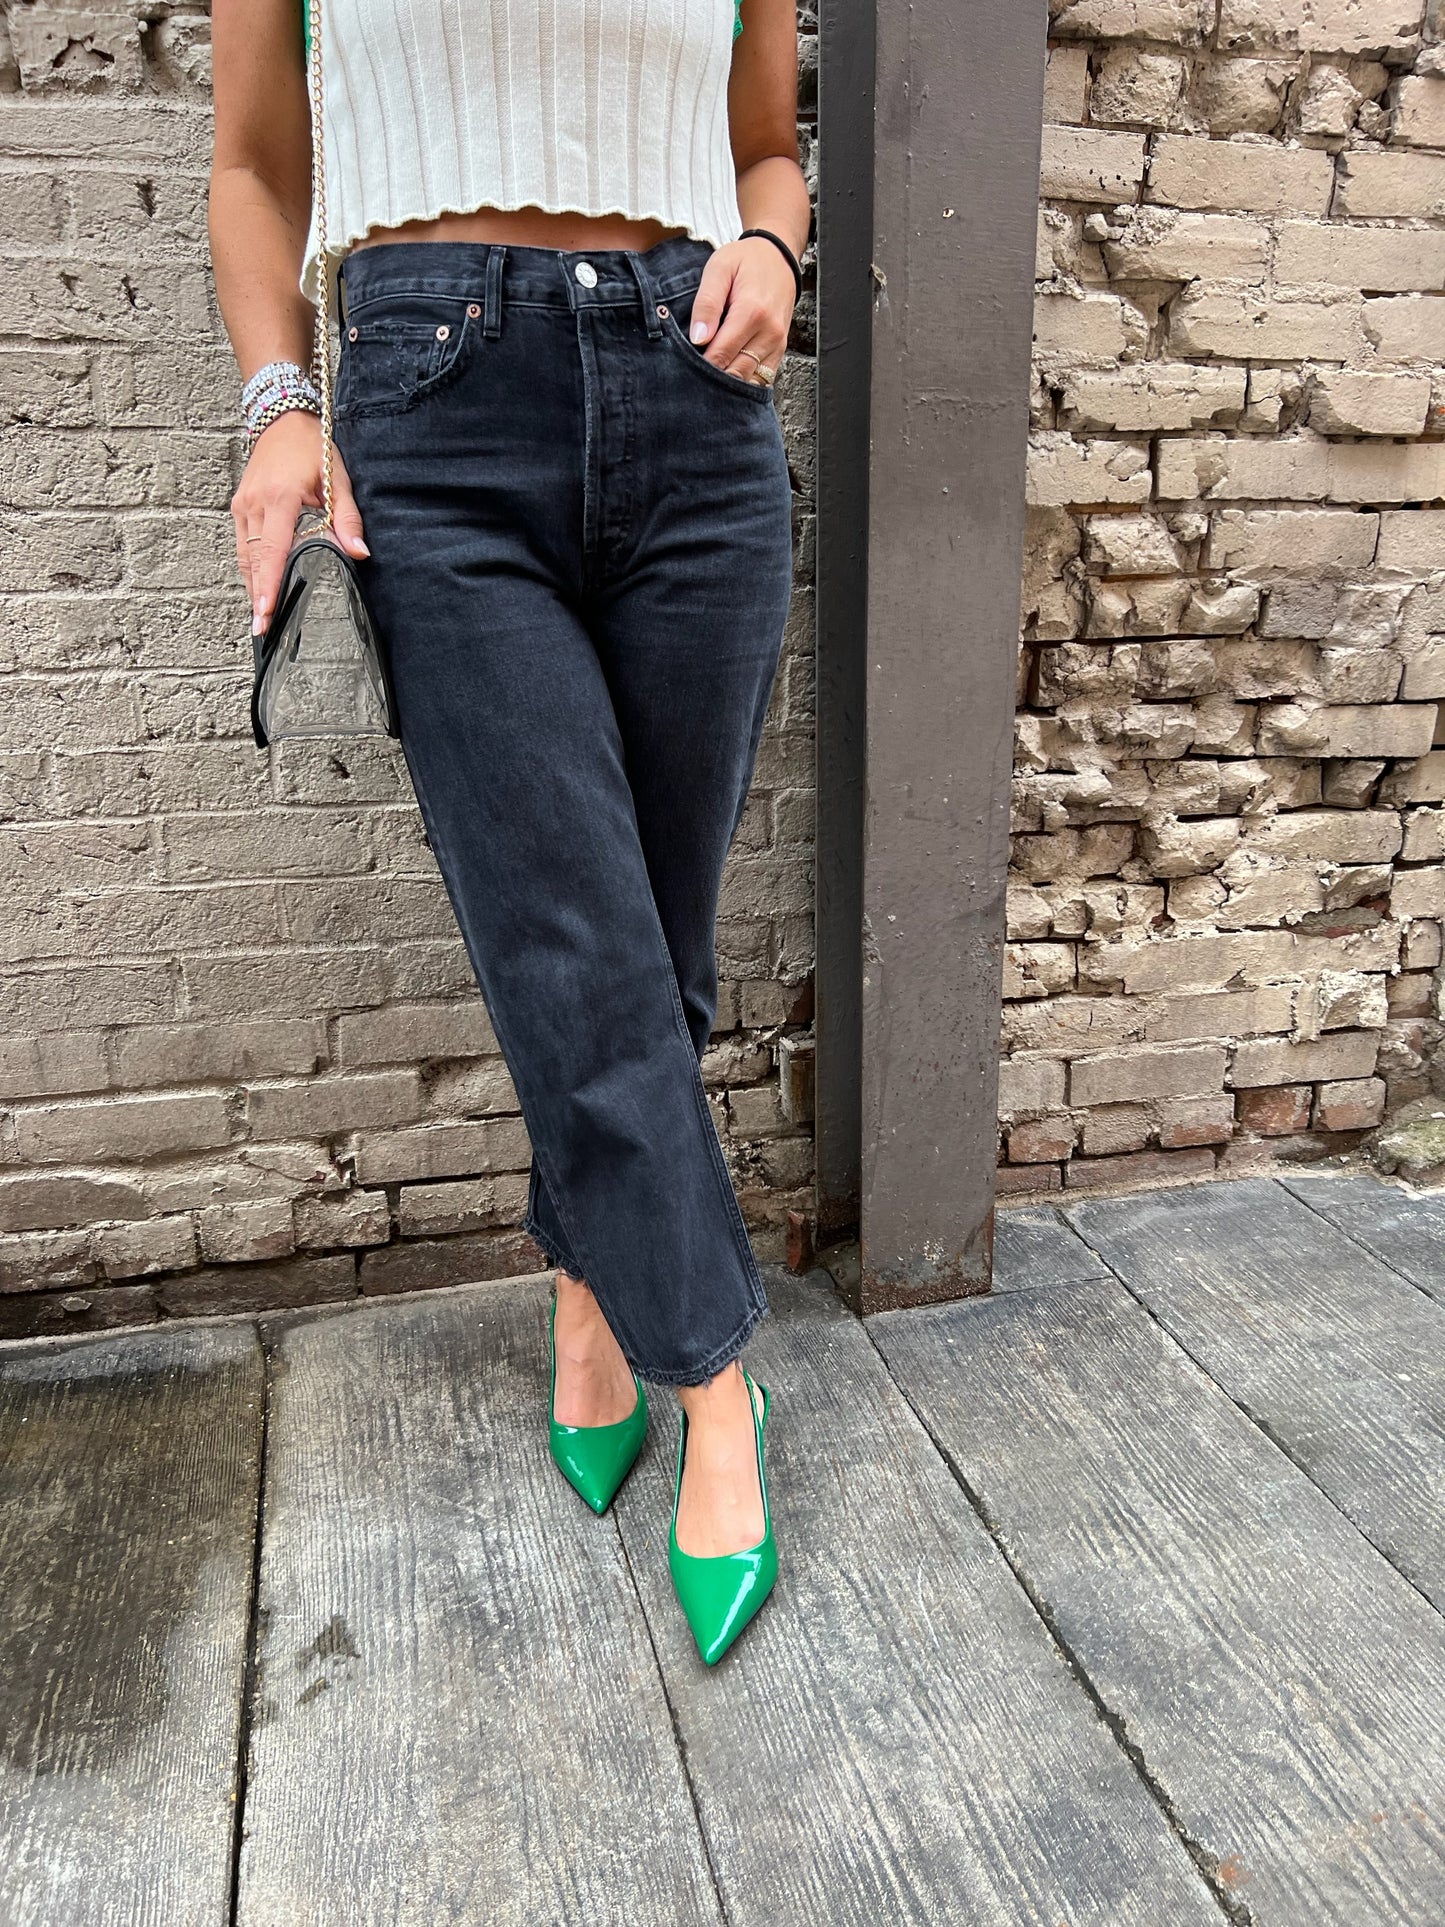 AGOLDE 90S CROP JEAN IN TAR - THE HIP EAGLE BOUTIQUE 